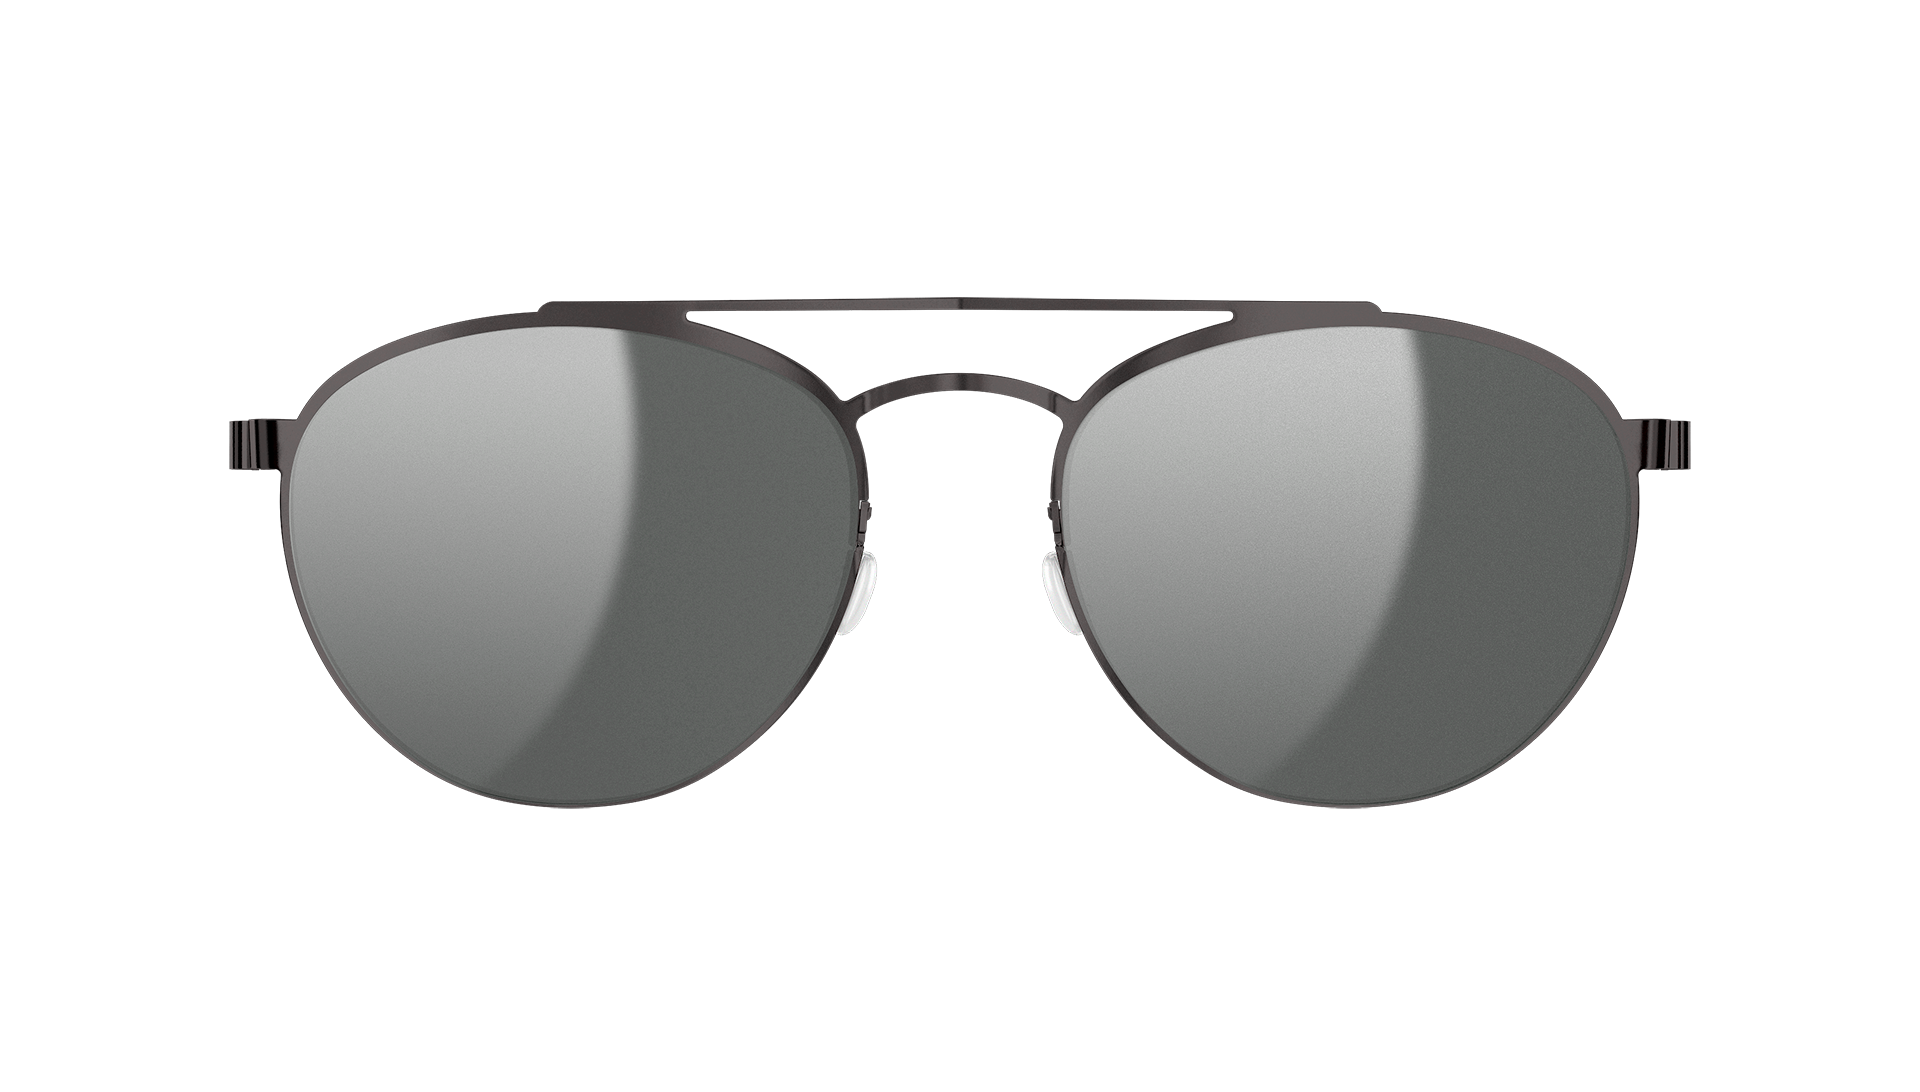 LINDBERG sun titanium Model 8582 double bar rounded aviator sunglasses in black with silver mirrored lenses